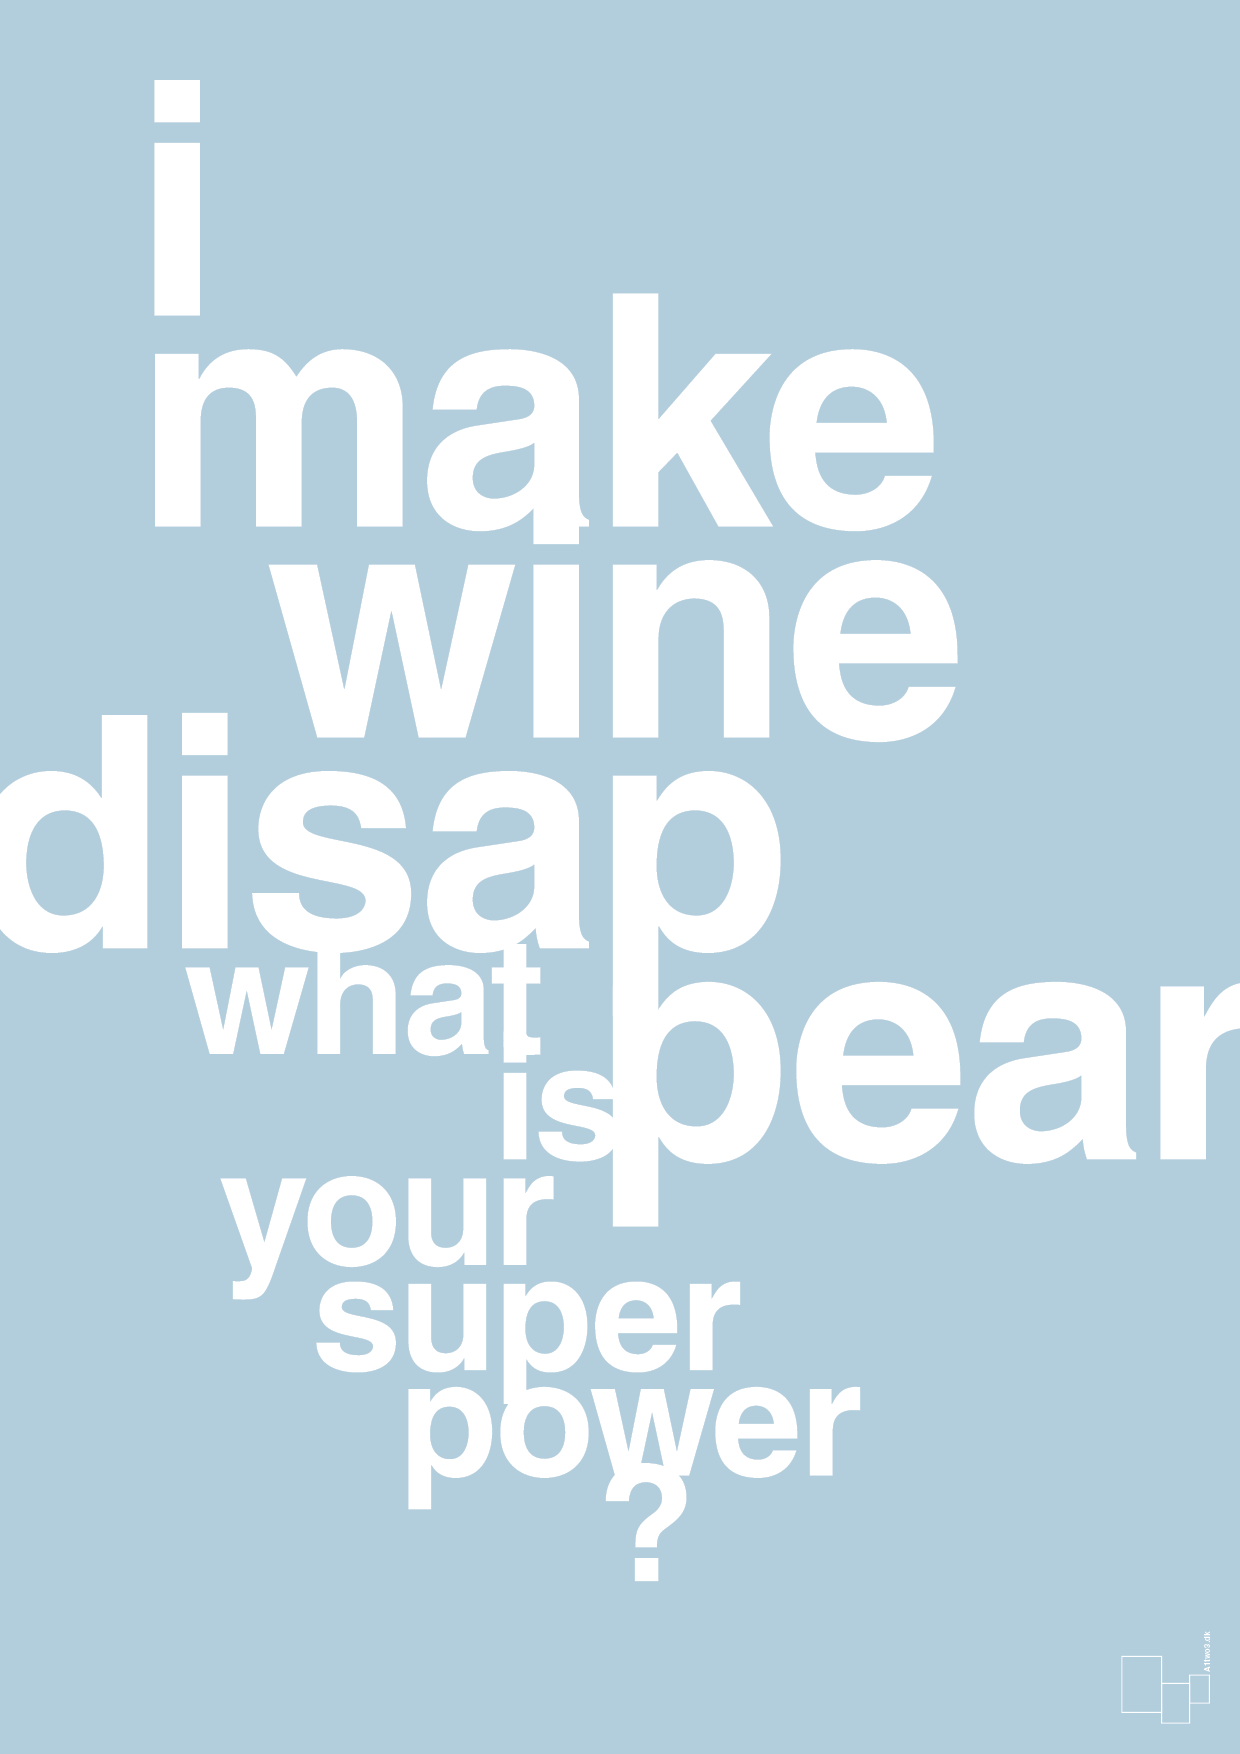 i make wine disappear what is your super power - Plakat med Mad & Drikke i Heavenly Blue